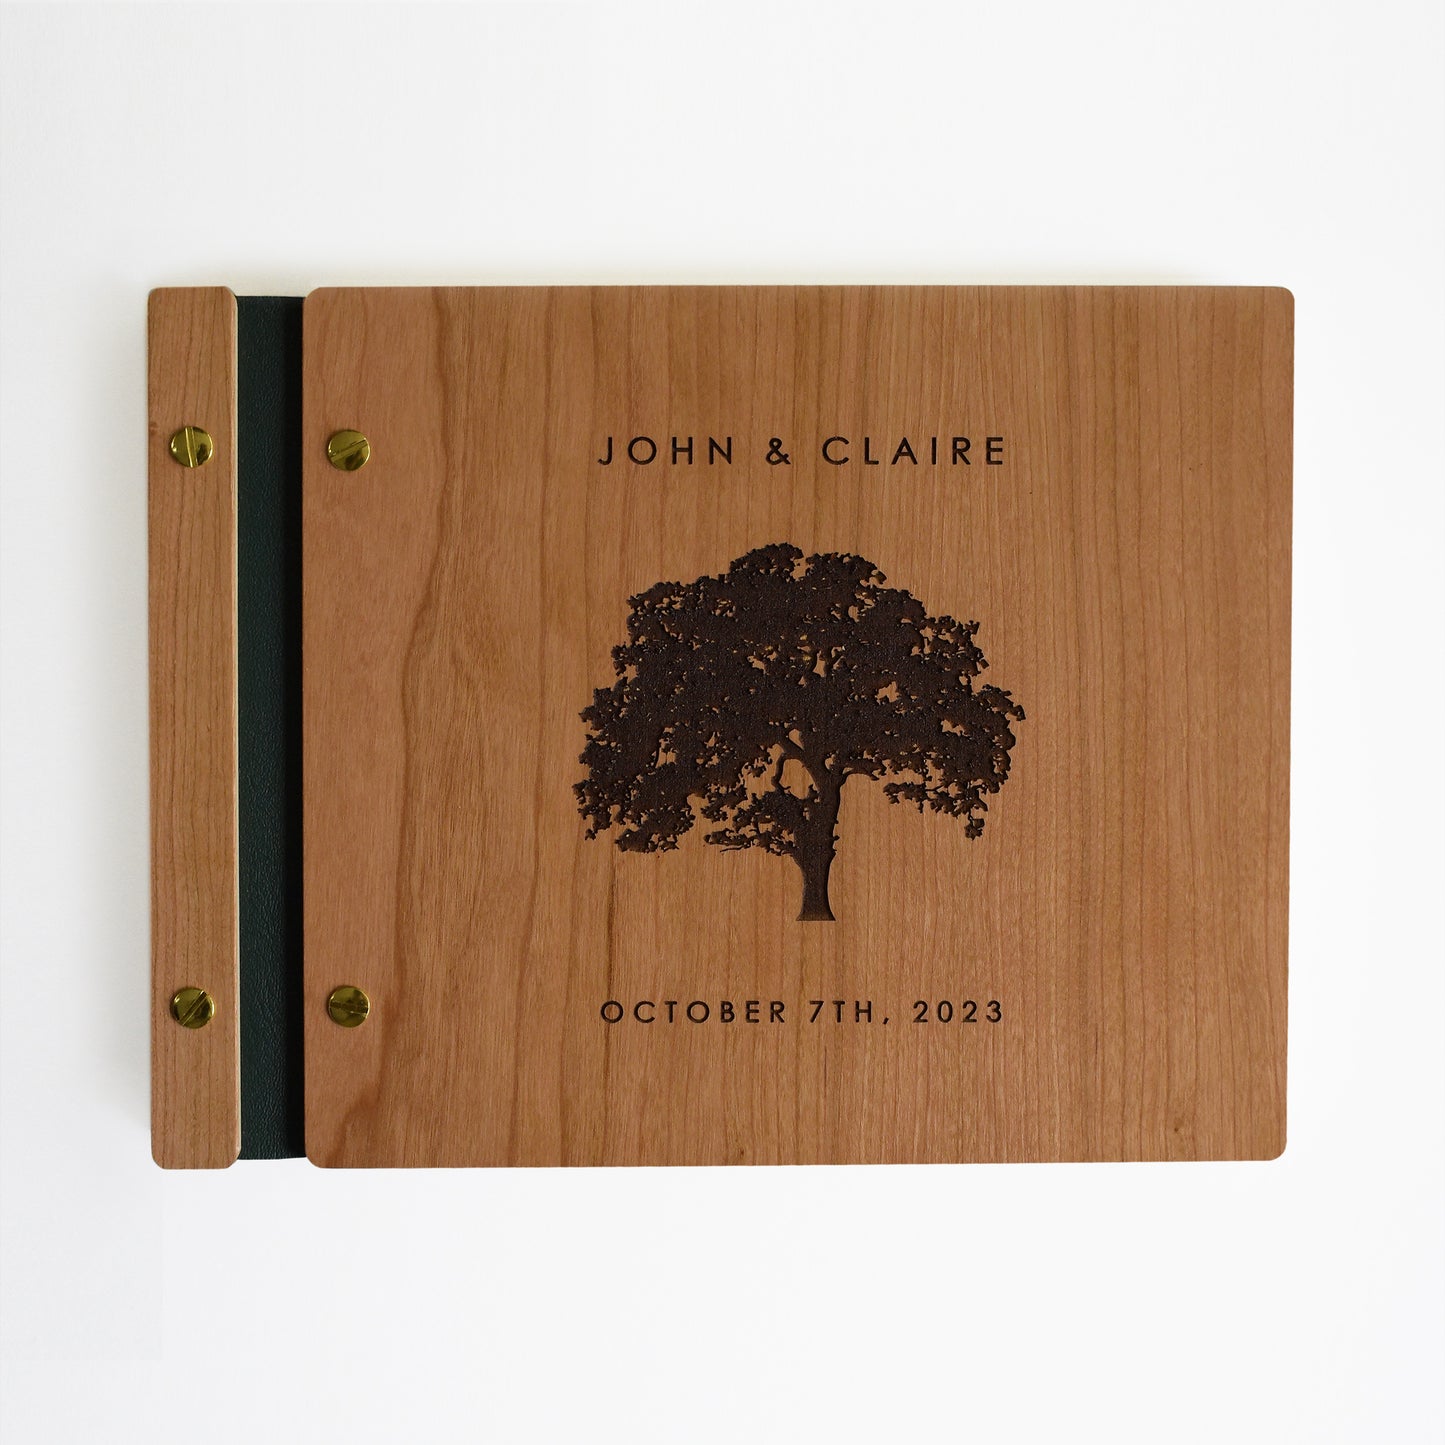 An 8.5x11" guest book lies on a table. Made of cherry wood, black vegan leather binding, and copper hardware. The front cover includes an engraved design with personalized names.